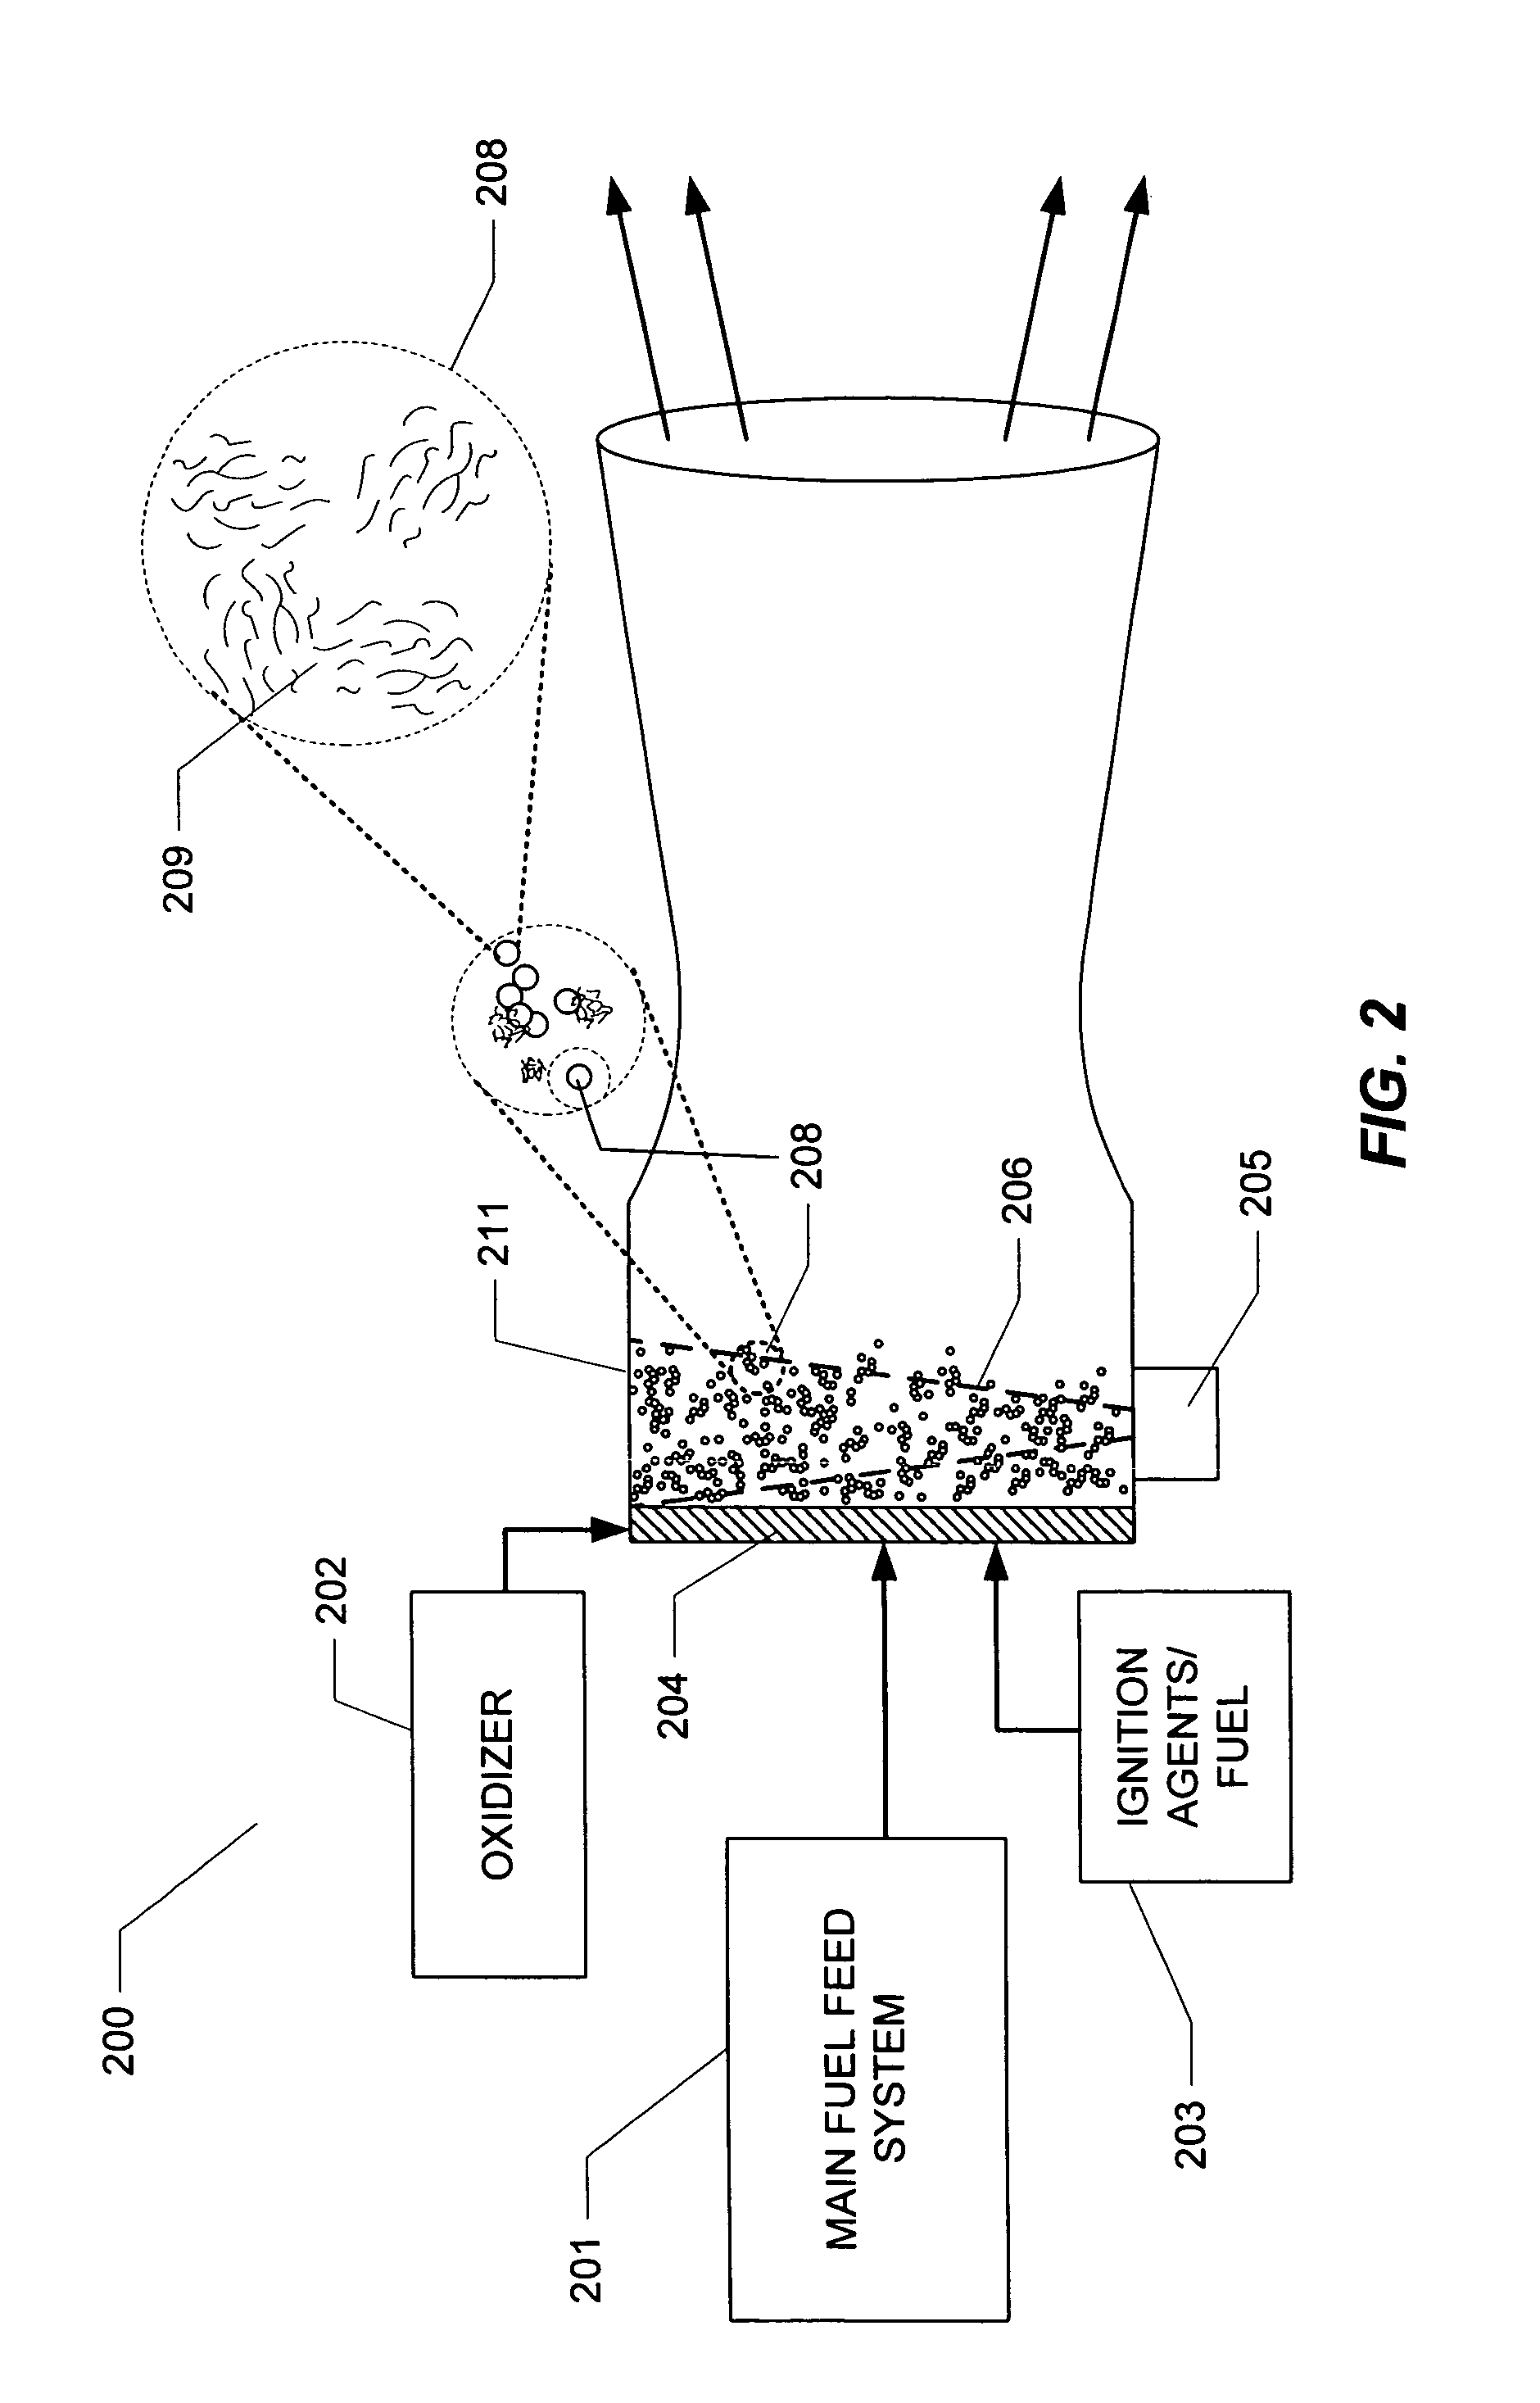 Apparatus for distributed ignition of fuels by light sources